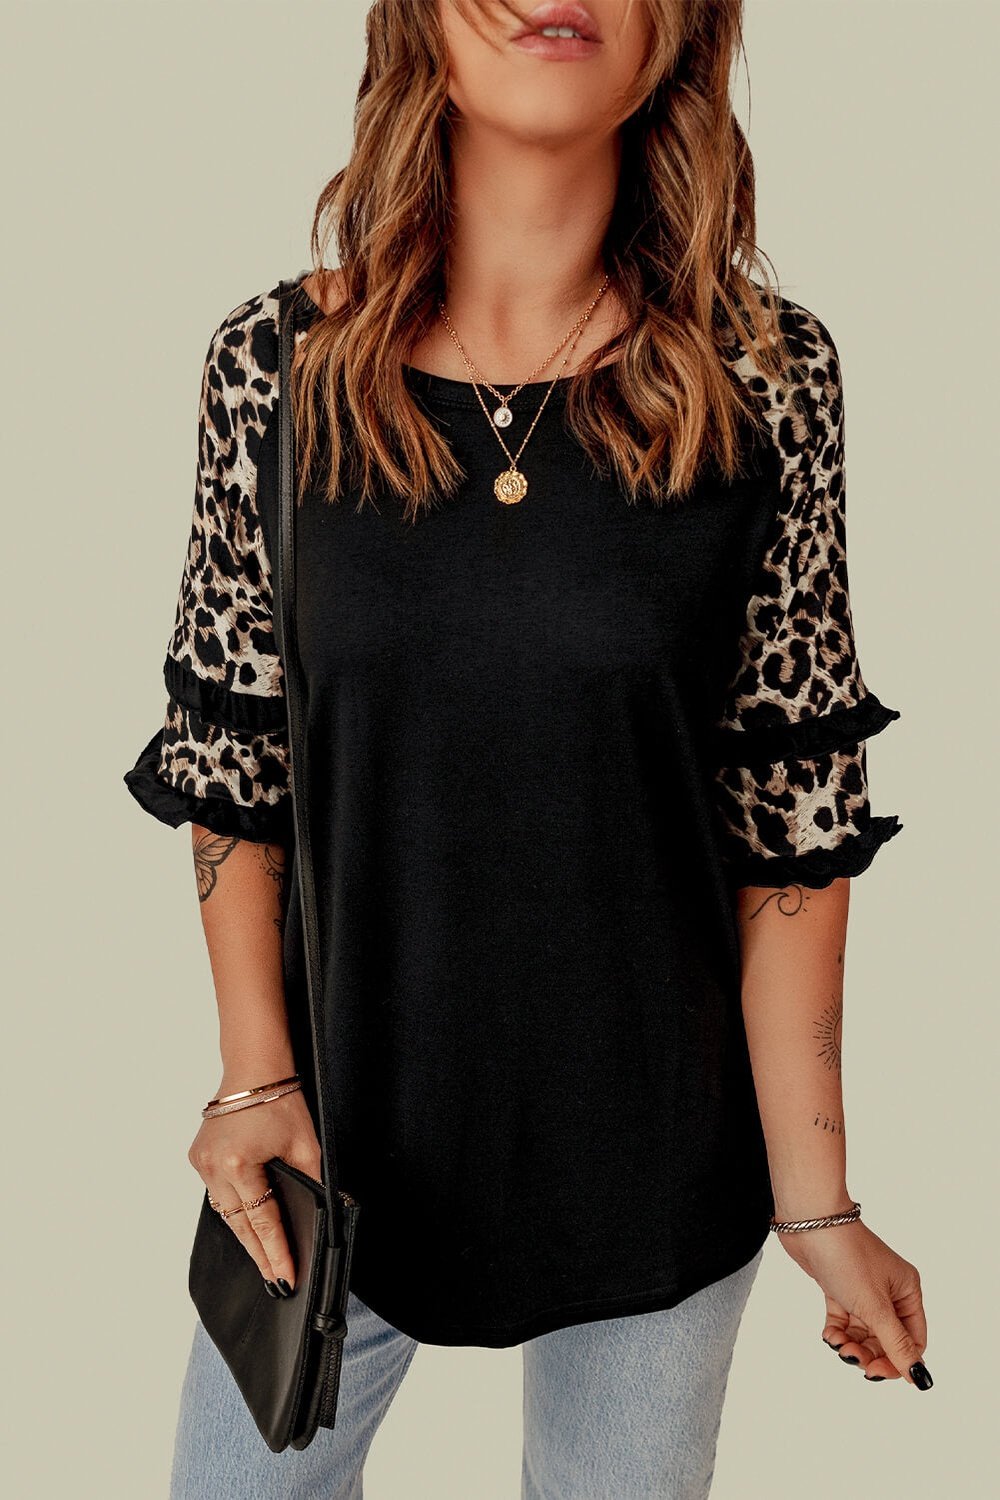 Leopard Contrast Ruffled Top - T-Shirts - FITGGINS